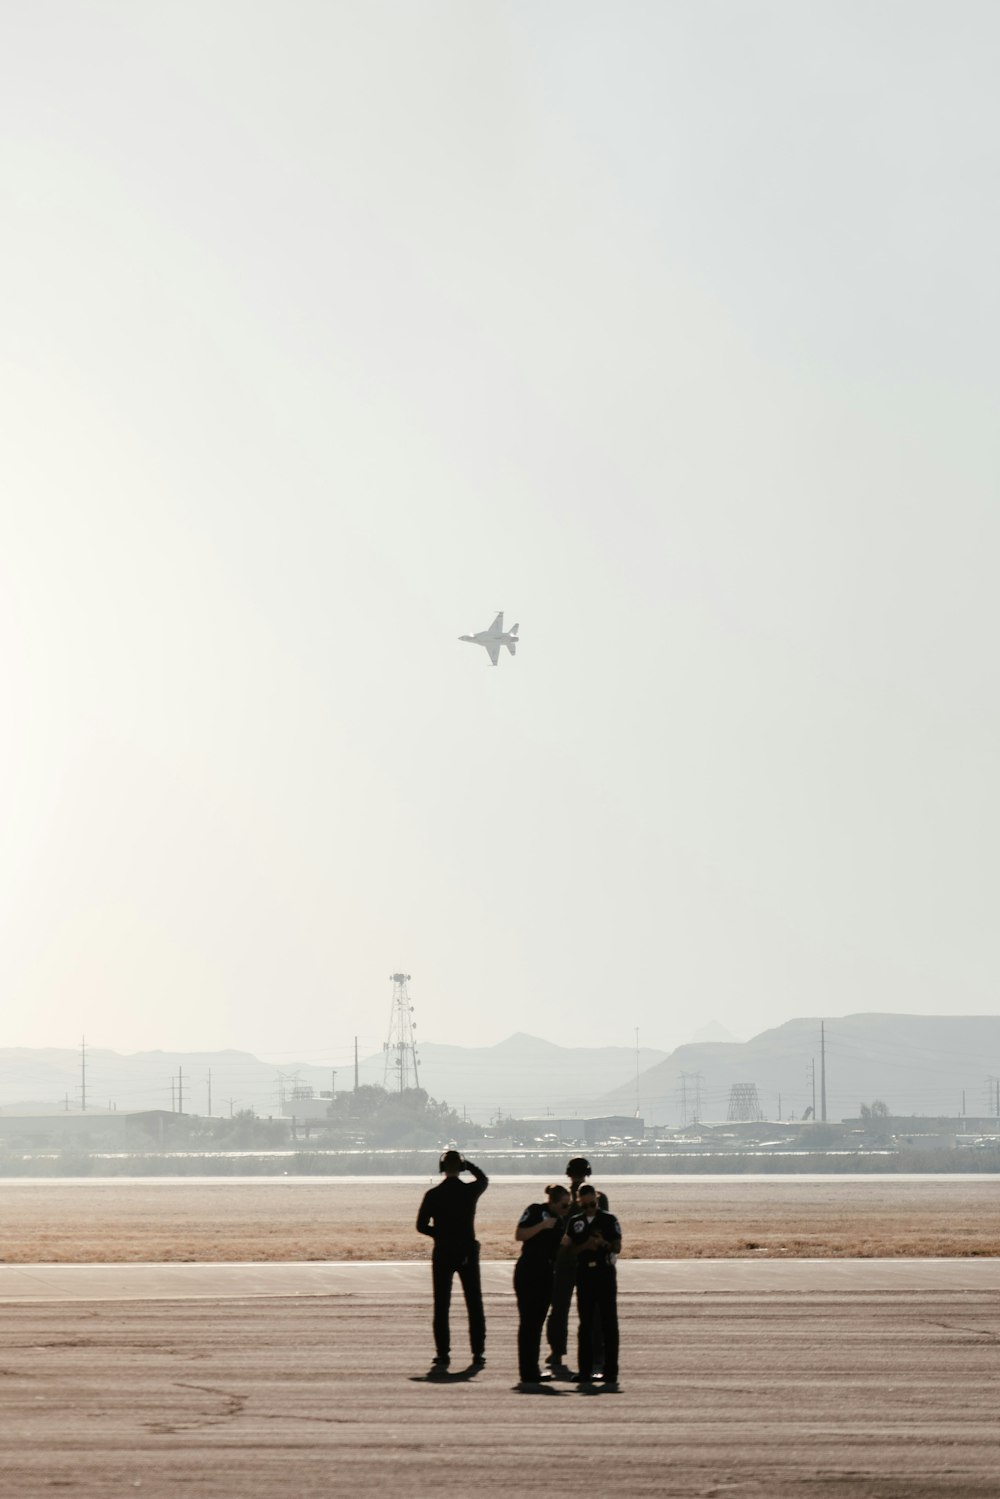 a group of people standing on top of an airport tarmac